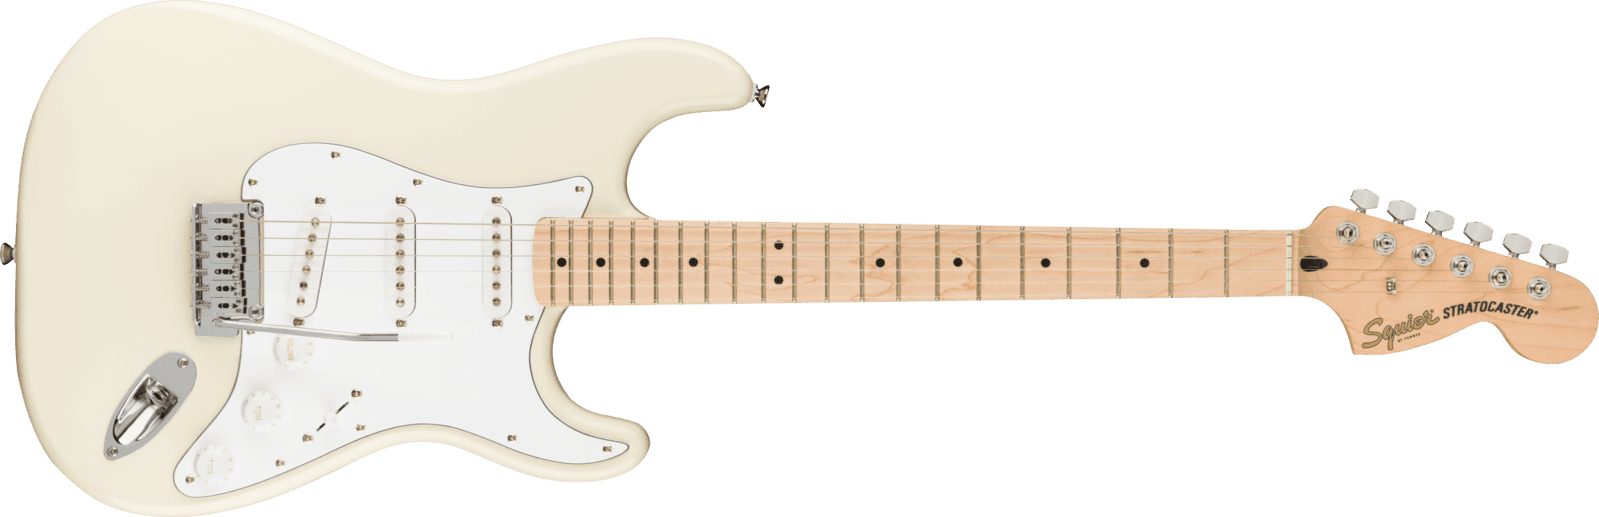 Squier Affinity Strat Olympic White Mn